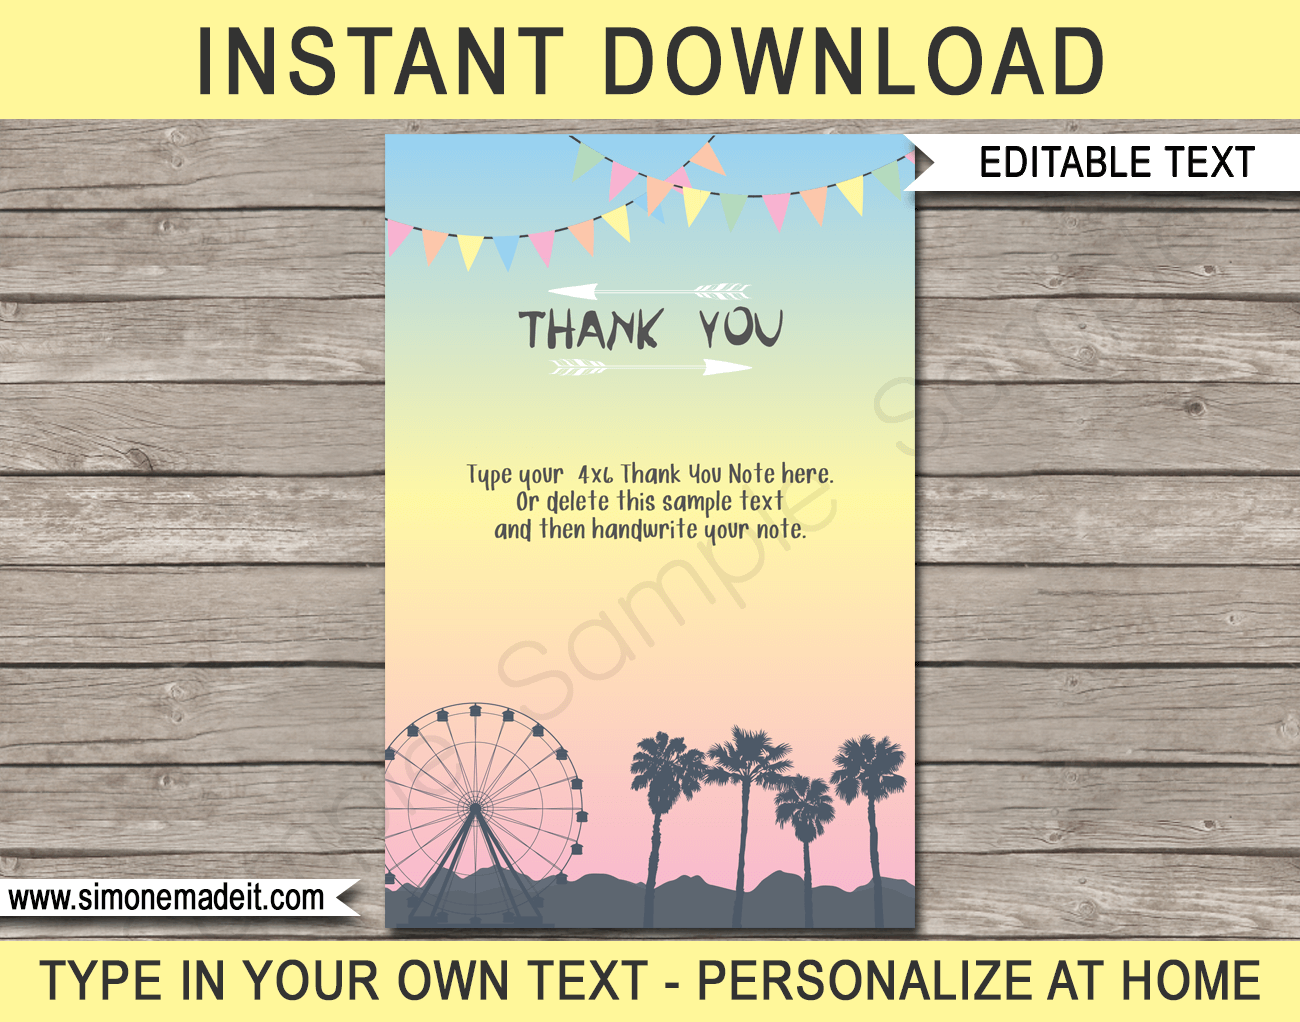 Printable Coachella Themed Party Thank You Cards - editable template - Festival Inspired Birthday Party - Instant Download via simonemadeit.com